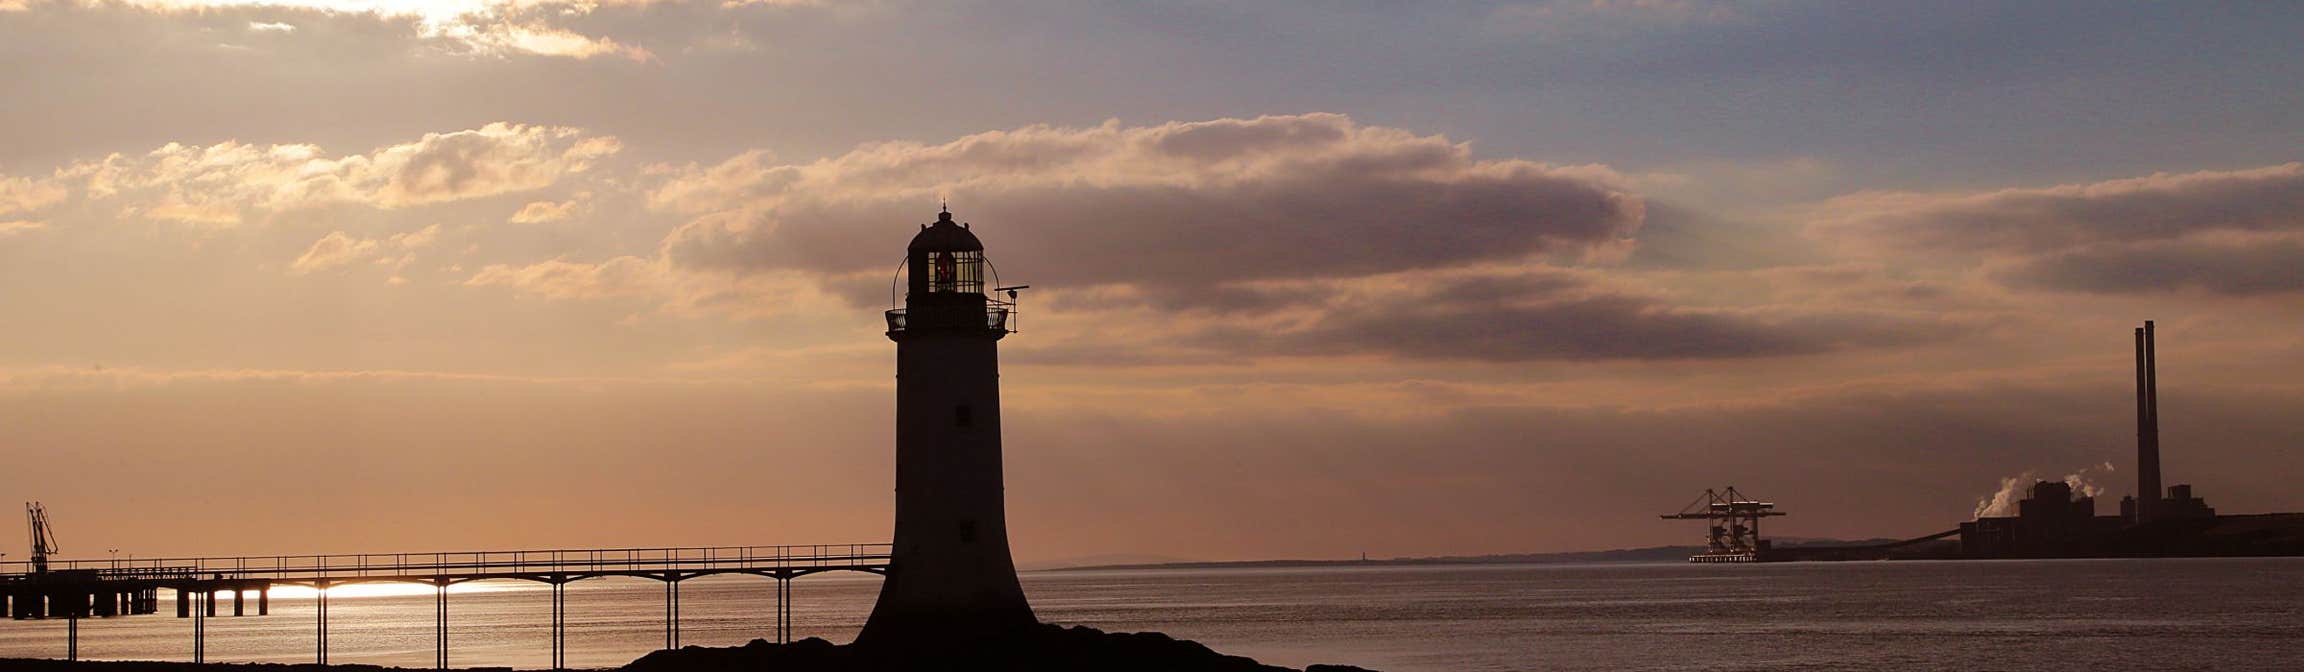 Image of a lighthouse in Tarbert in County Kerry